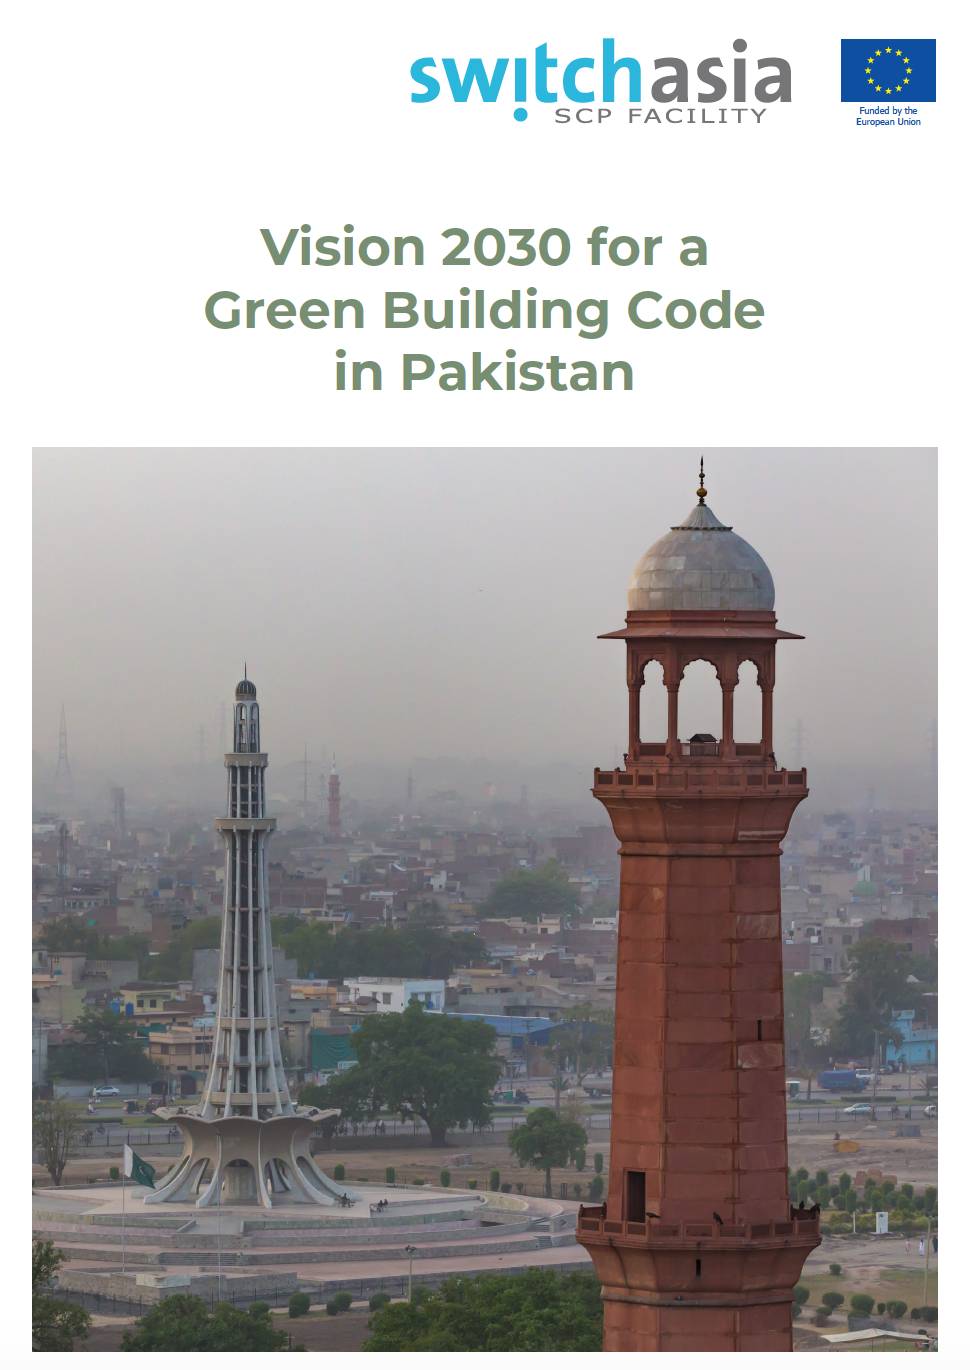 Vision 2030 for a Green Building Code in Pakistan